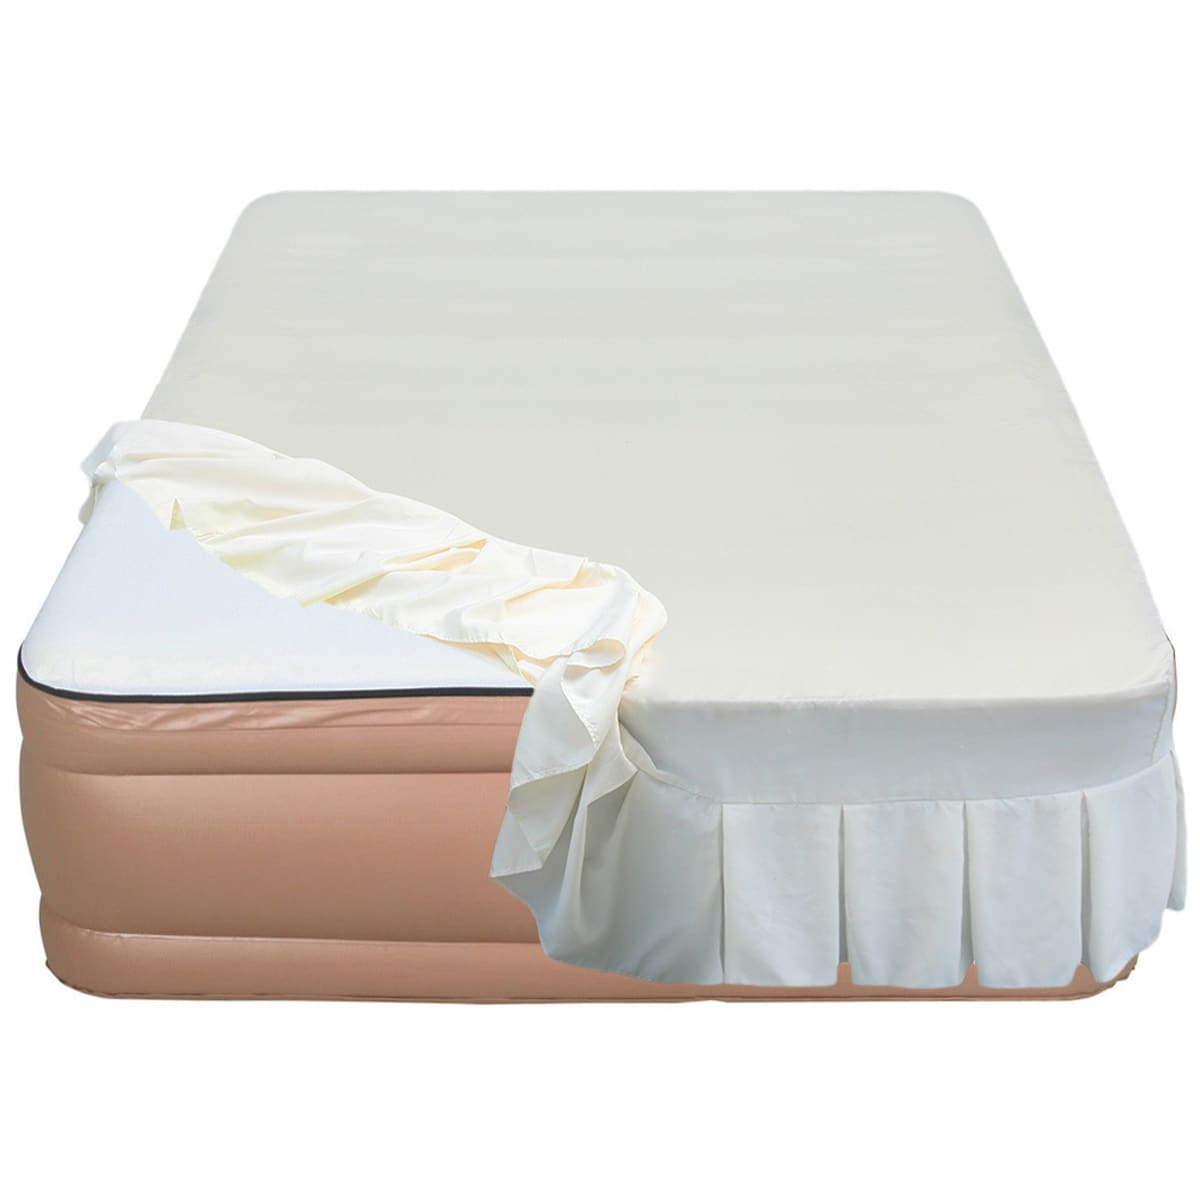 Airtek Raised 22 inch Queen size Memory Foam Airbed With Skirted Sheet Cover